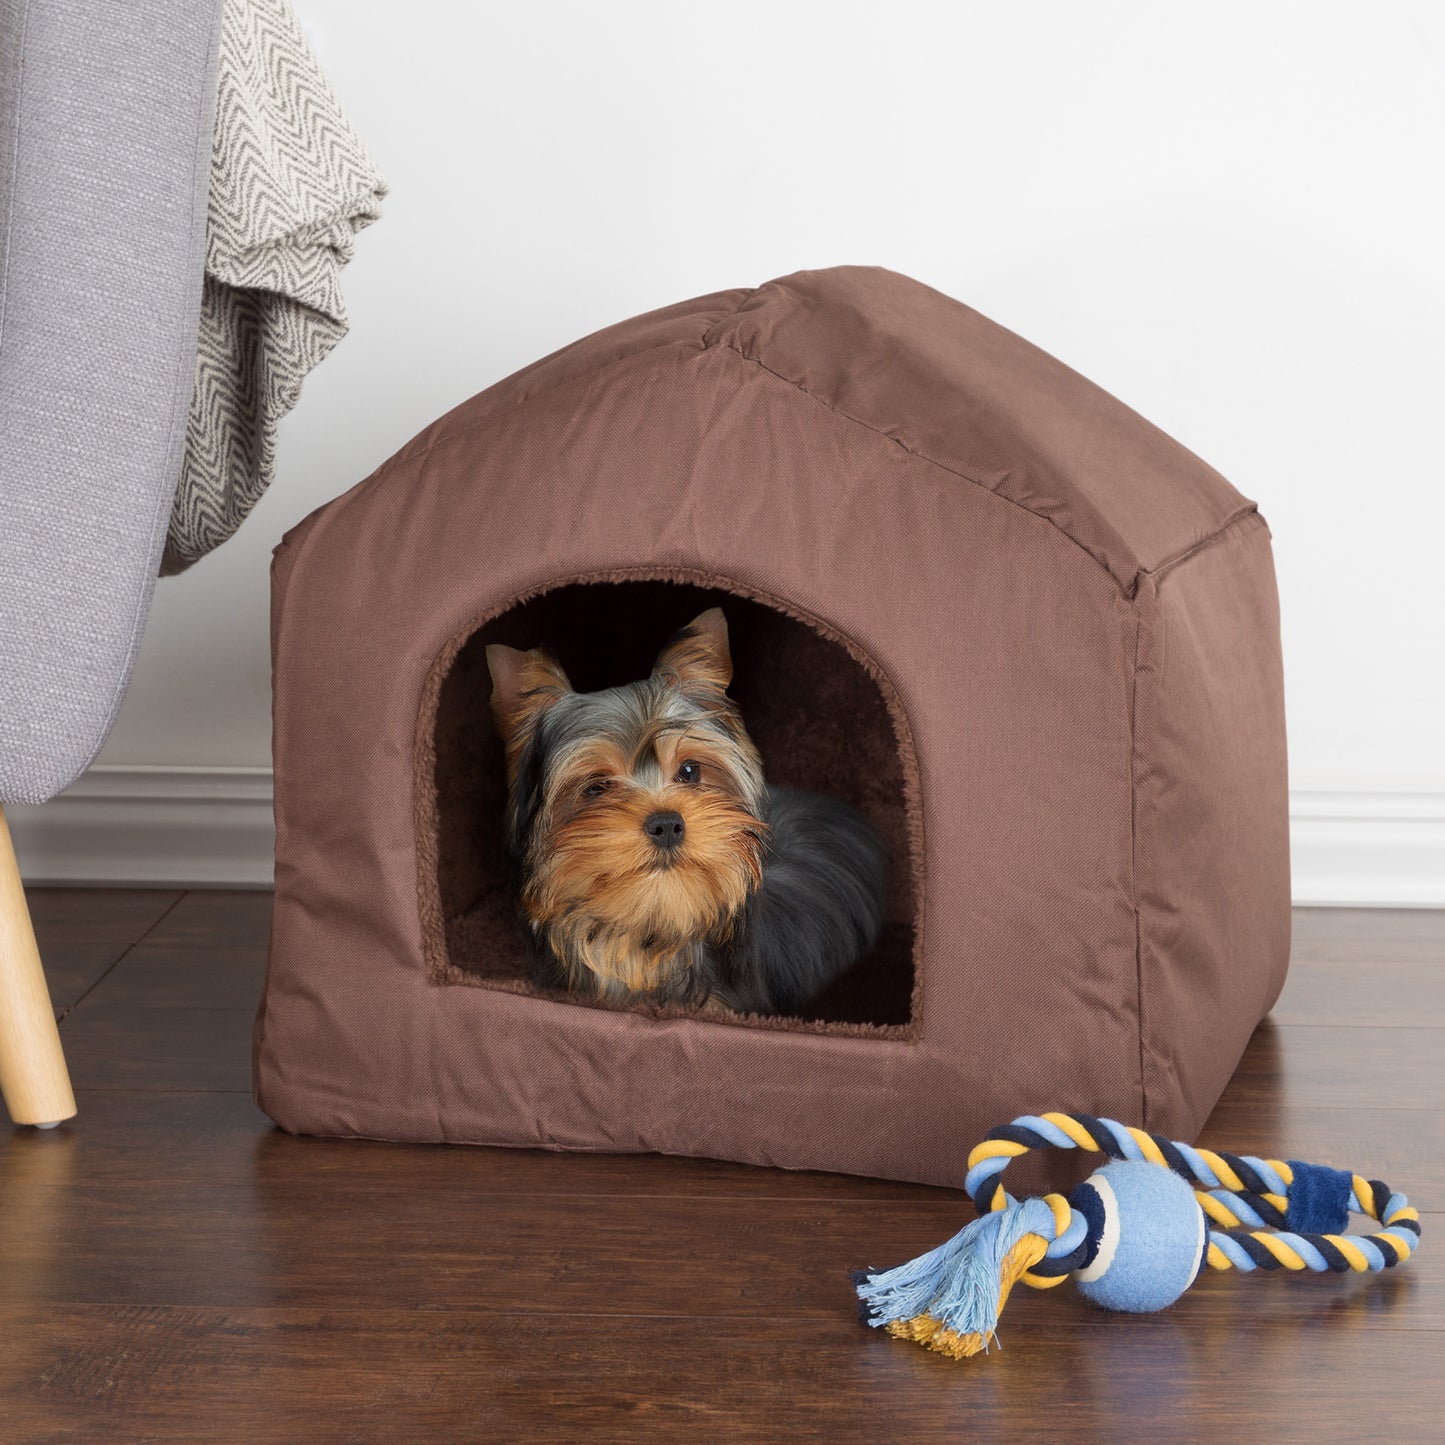 Covered Dog Bed for Pets